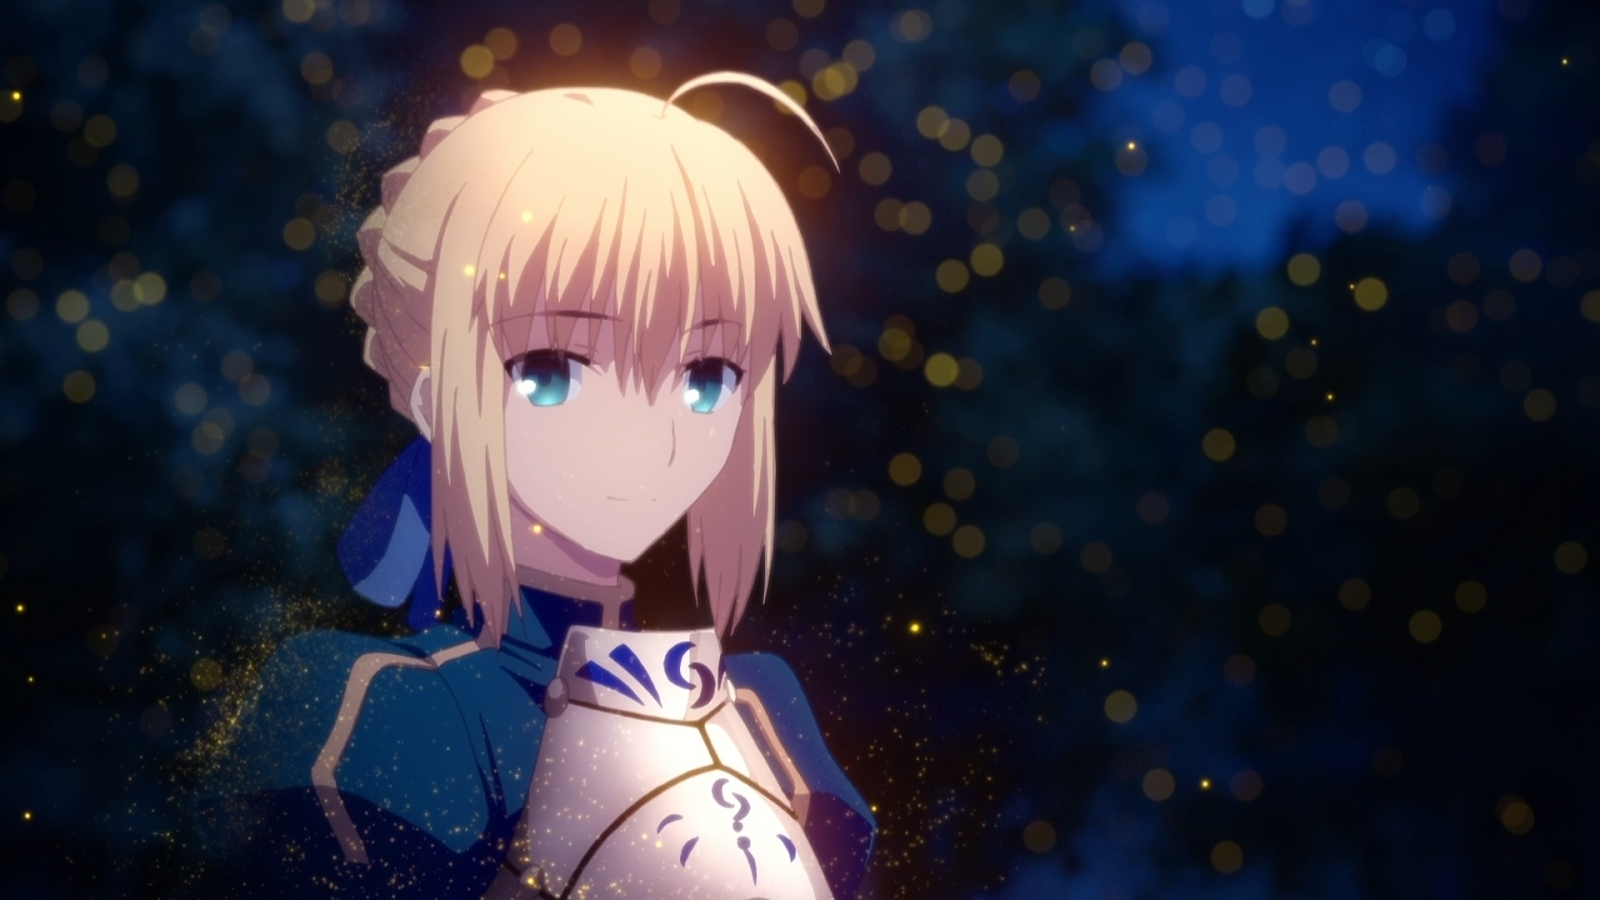 Assistir Fate/stay night: Unlimited Blade Works - online